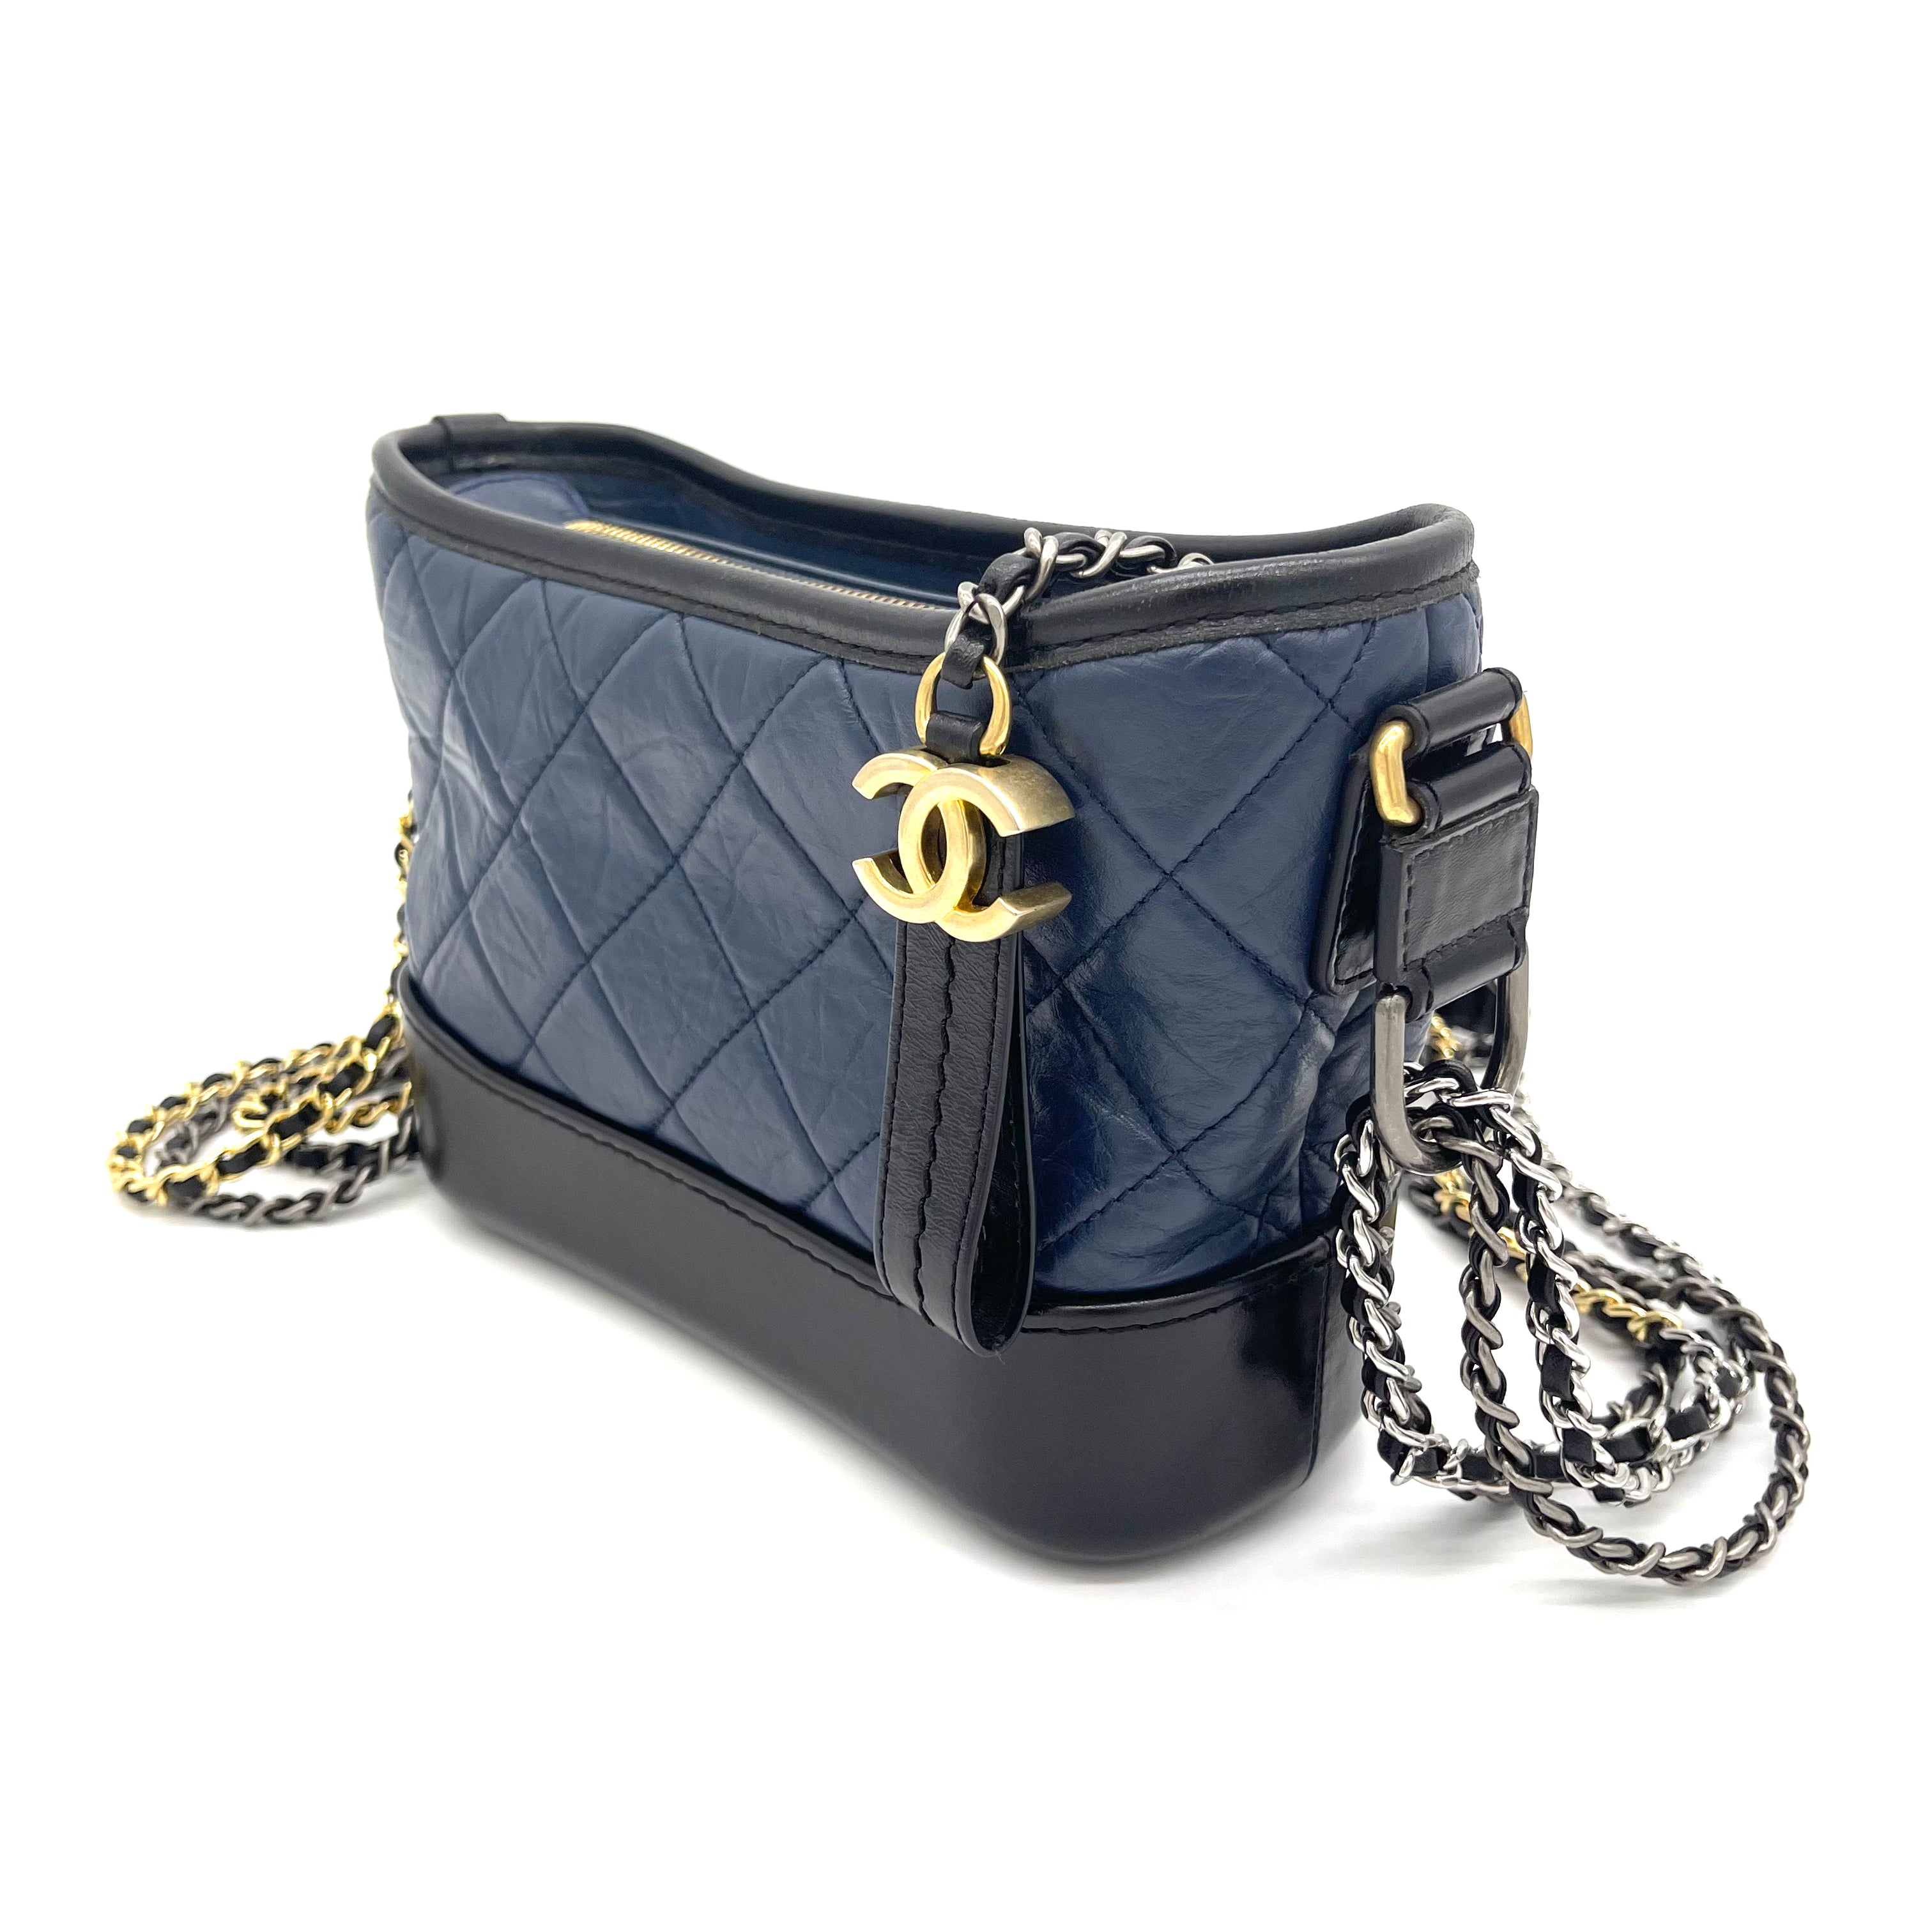 CHANEL, Bags, Navy Black Chanel Gabrielle Small Hobo Bag Excellent  Condition